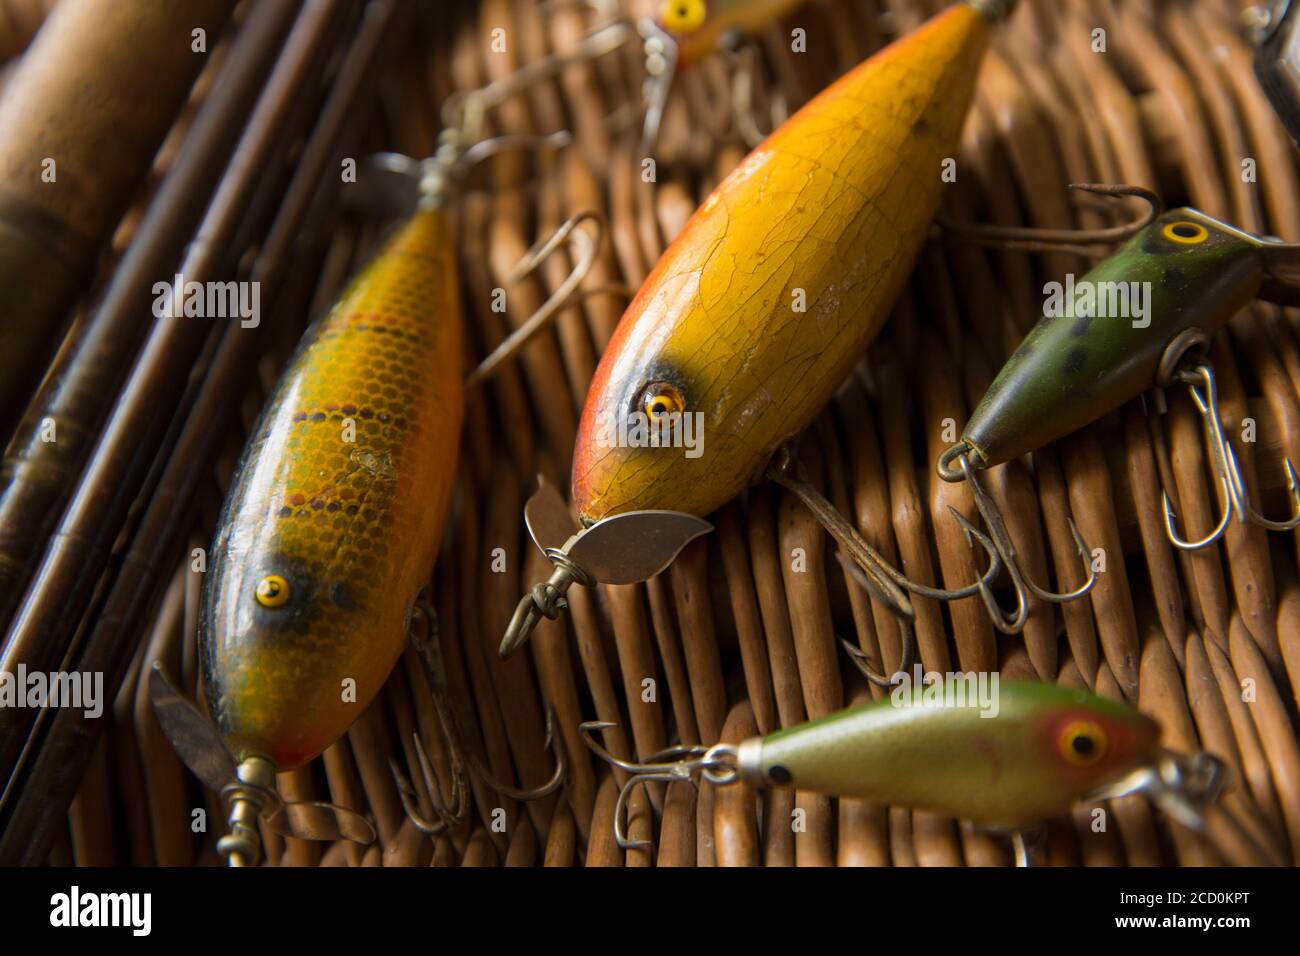 https://c8.alamy.com/comp/2CD0KPT/examples-of-old-south-bend-fishing-lures-or-plugs-to-catch-predatory-fish-displayed-on-a-whicker-tackle-box-the-larger-lures-are-south-bend-2CD0KPT.jpg